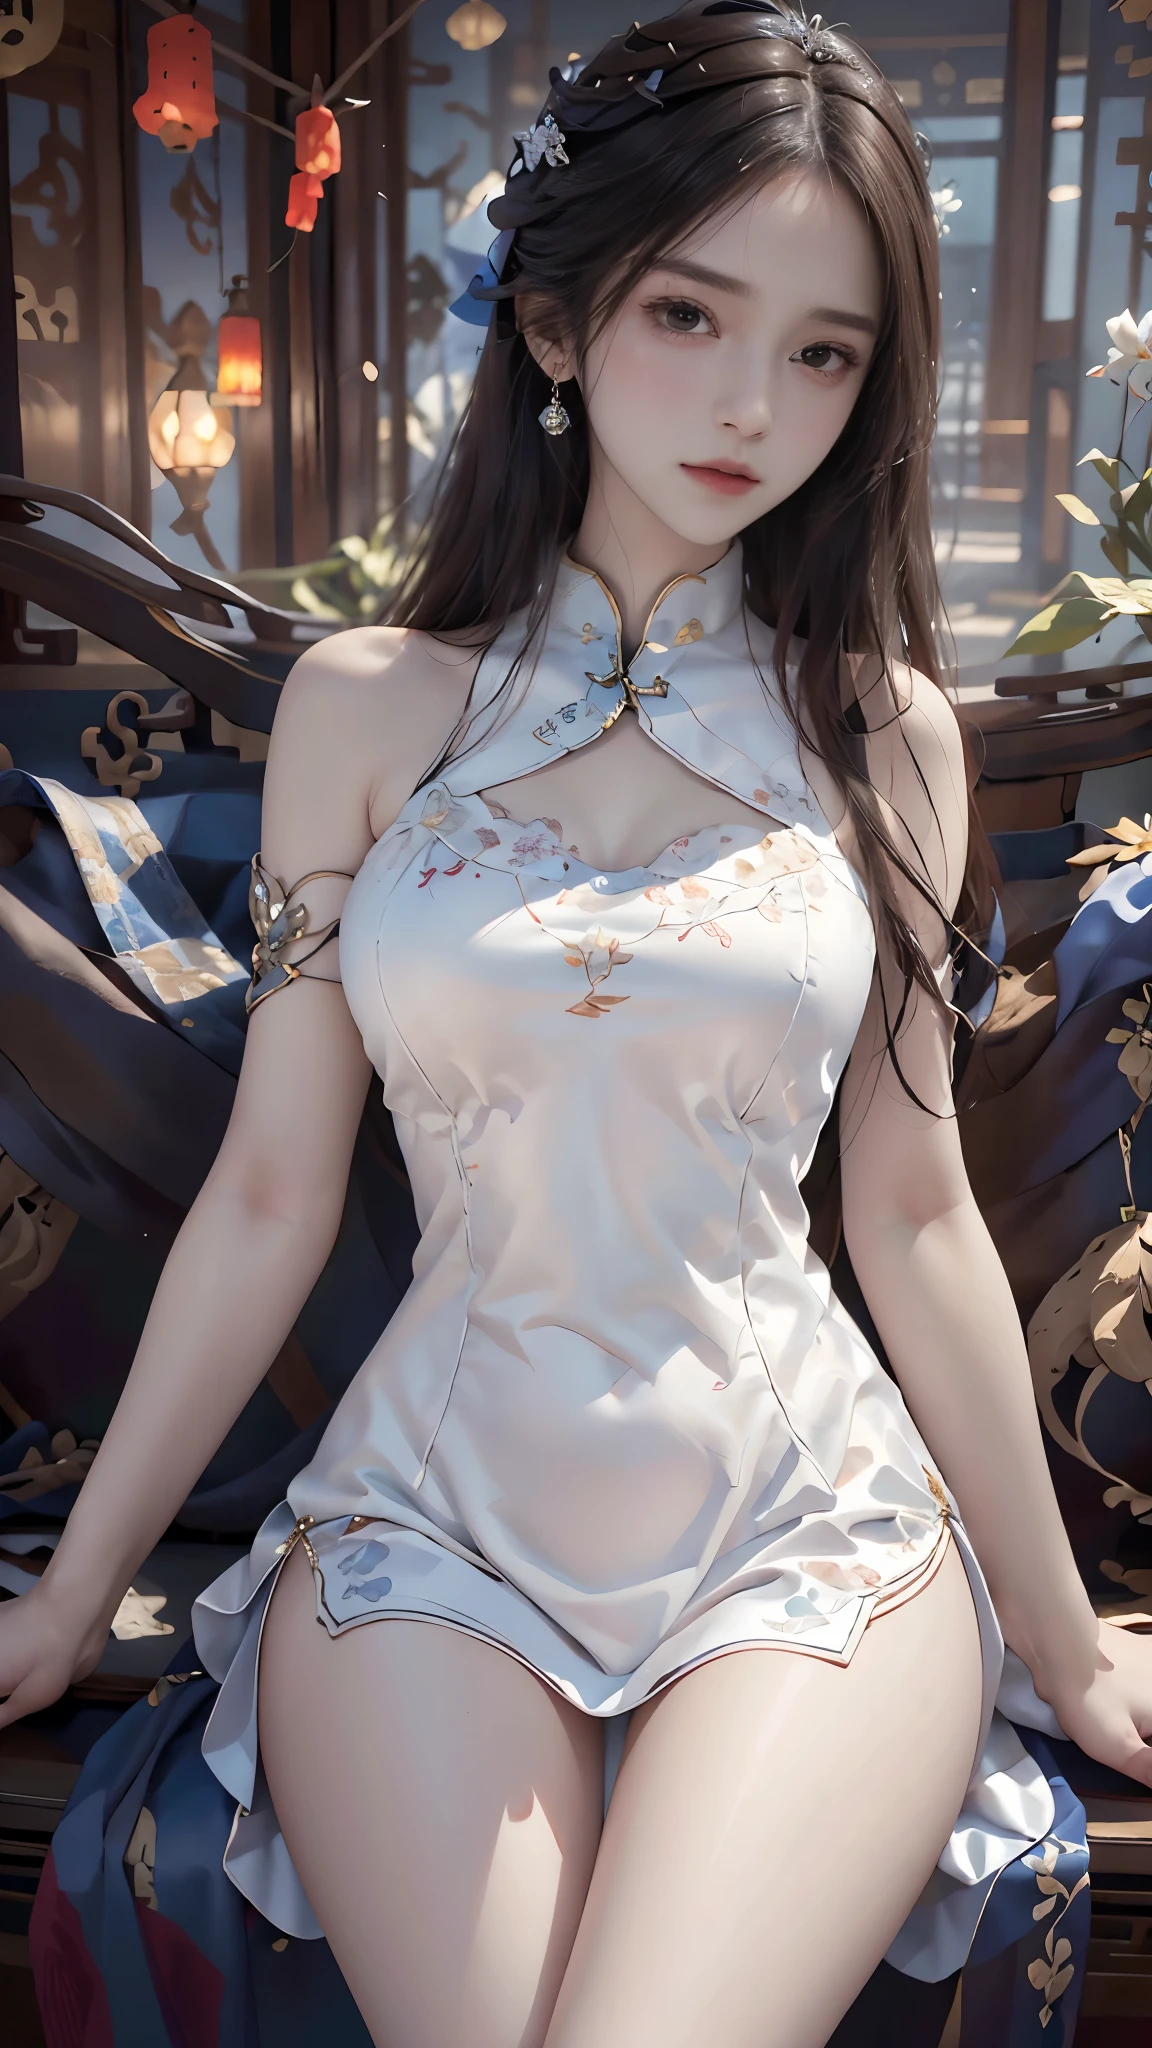 masterpiece，best quality，high quality，High definition，high quality的纹理，high quality的阴影，High details，beautiful details，fine details，Extremely detailed CG，Detailed texture，lifelike面部表现，lifelike，rich and colorful，exquisite，sharp focus，(intricate detailake up，pureerosface_v1:0.5)，(Beautiful details, exquisite face，(Beautiful details, exquisite eyes)，Perfectly proportioned face，highDetails of the skin，Details of the skin，Four fingers and one thumb in optimal proportions，emaciated:1.3)，1 girl，17 years old，high，(Smooth abdominal muscles:1.55)，(abdominal muscles:0.5)，pretty，Perfect，high，((bare shoulders)), ((The skirt is short)), (long legs)，(straight legs)，(thin waist)，((White skin))，White skin，((White skin))，(emma watson)，Big breasts，((Caucasian))，light blonde hair，Stand with legs apart，looking at the audience，whole body，Portrait of cute blonde girl，((Standing in the wheat field,Look into the distance))，bloom，orange mist，sports，Wisps of hair，lifelike，high quality渲染，amazing art，high quality，film texture，Fujifilm XT3，dream